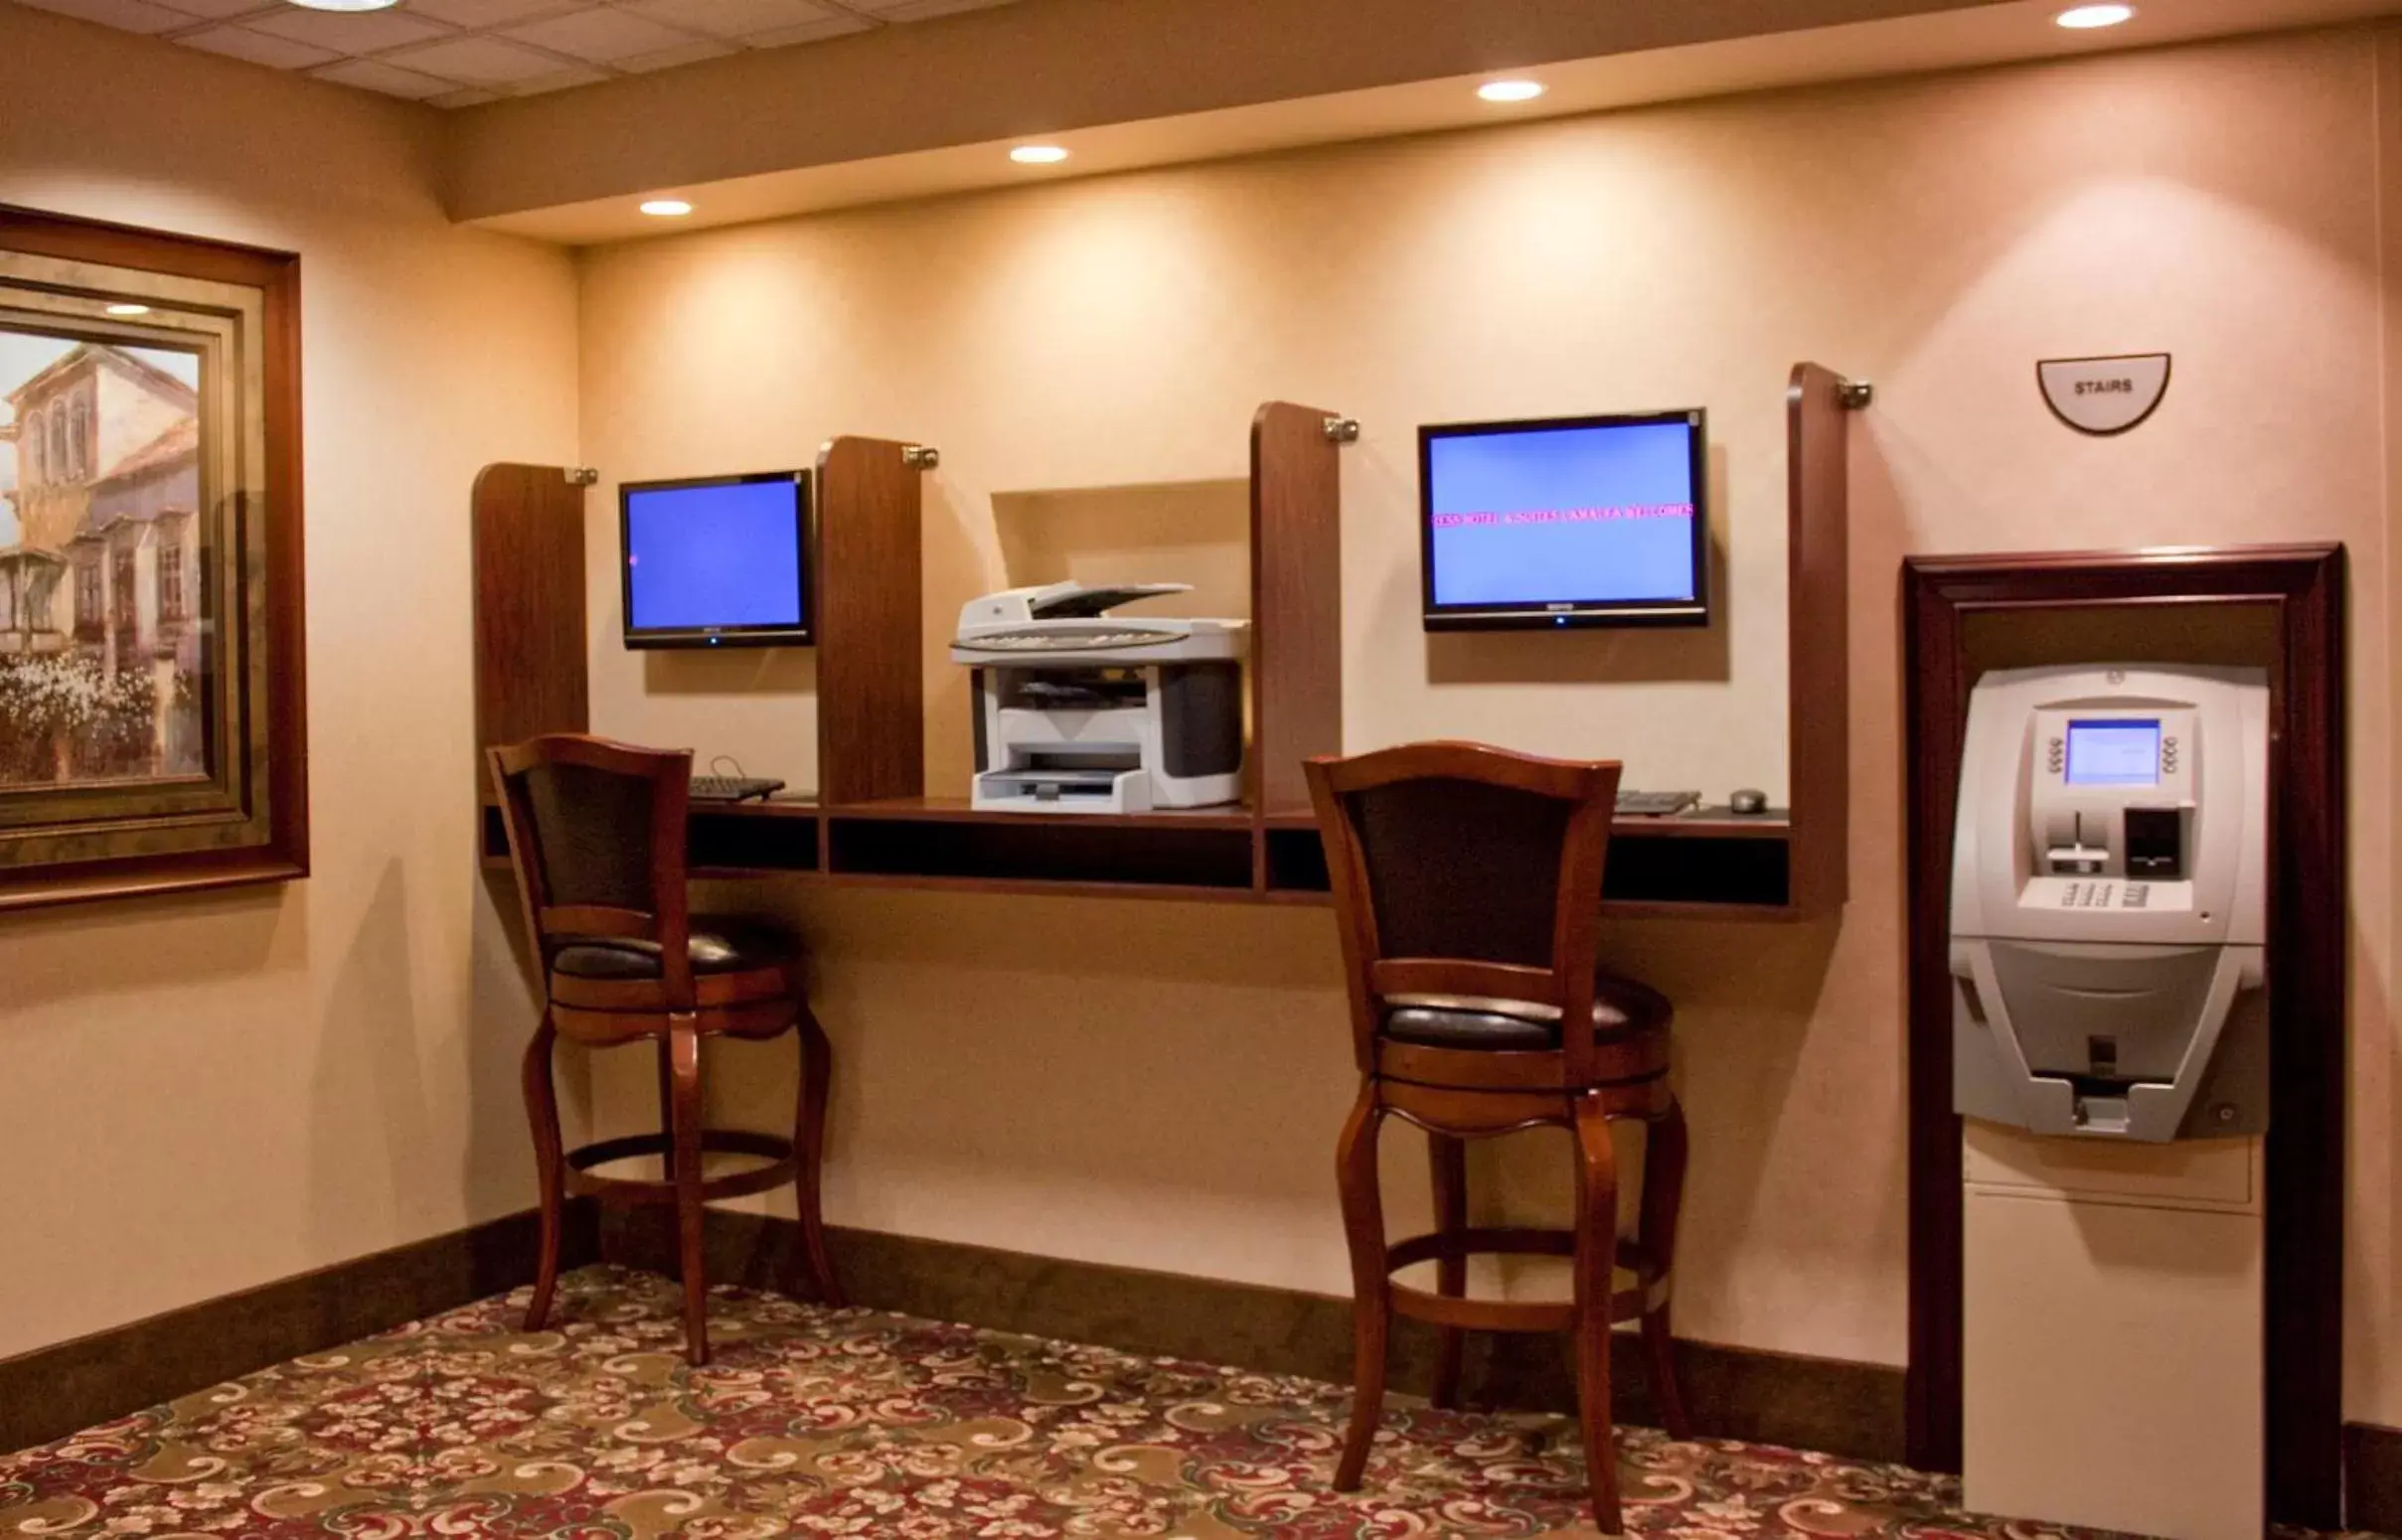 Business facilities in Wingate by Wyndham Mentor OH